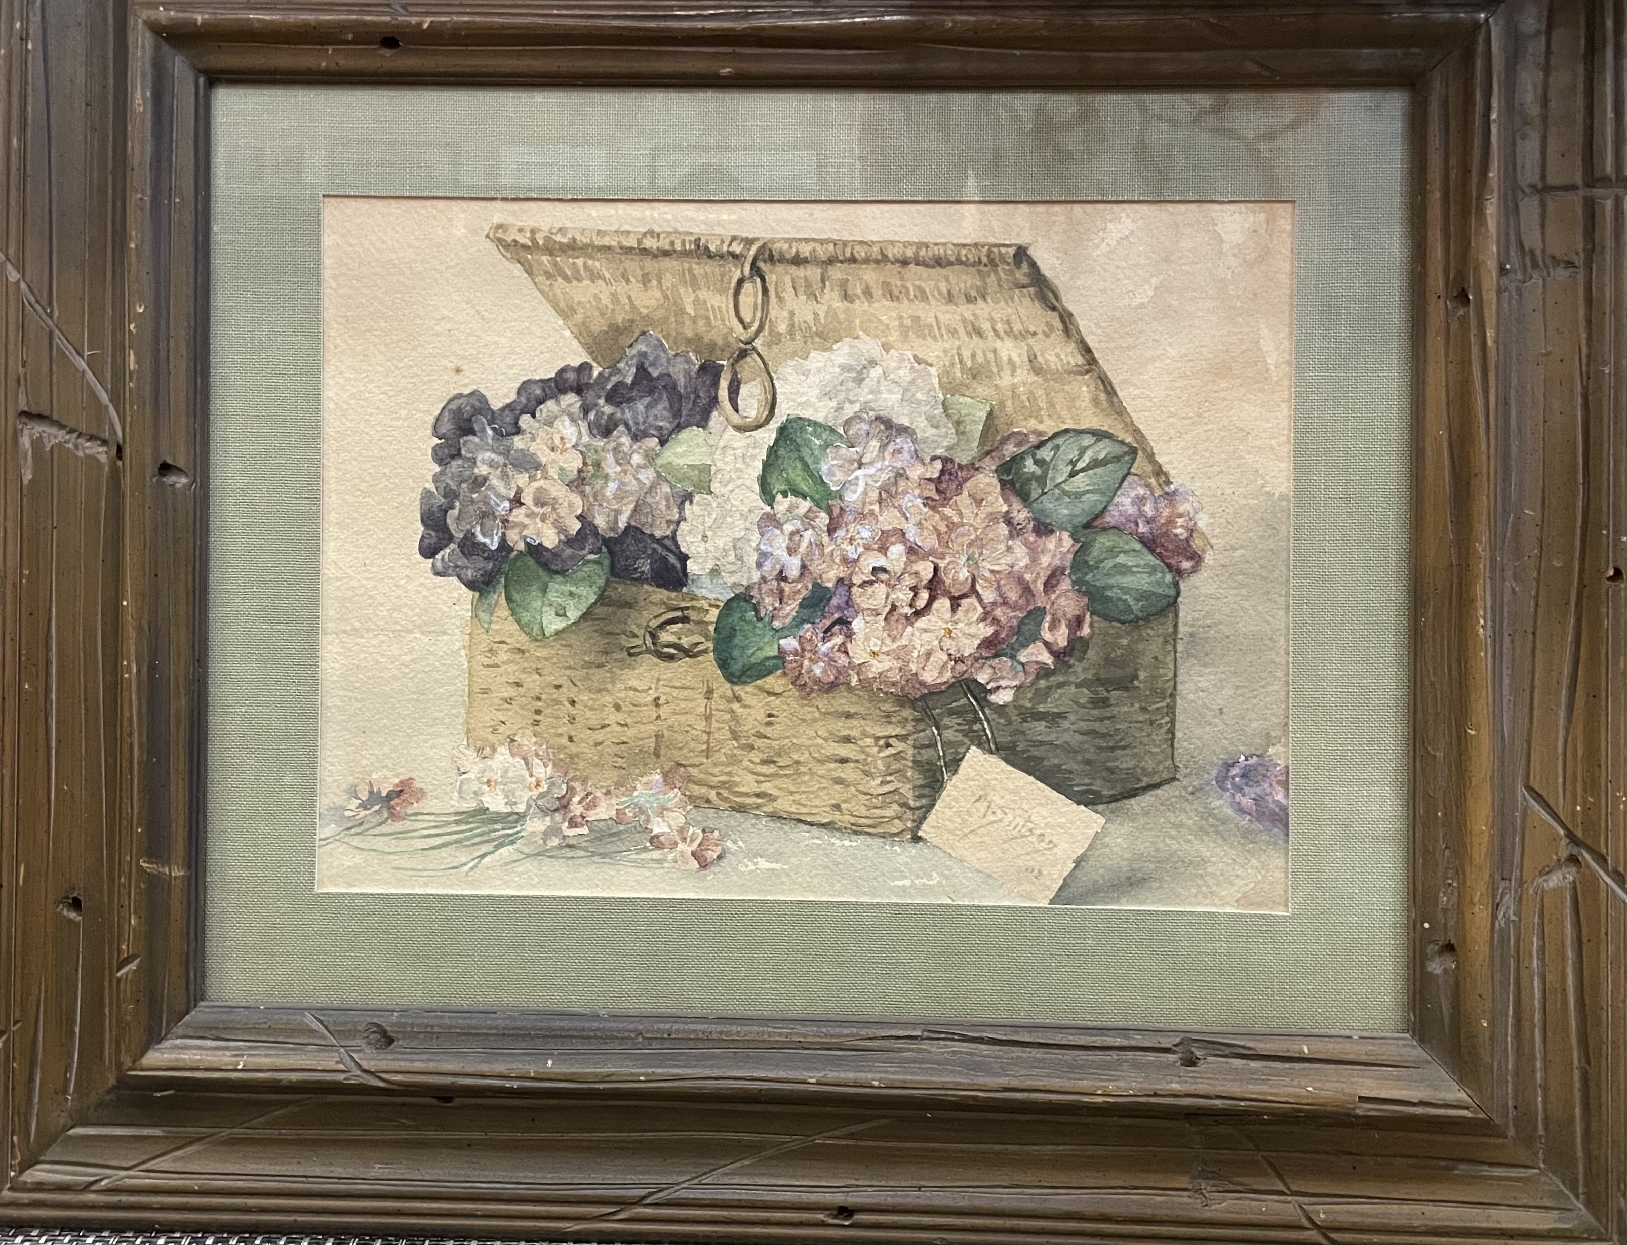 Watercolor Painting of Flowers in a Box
Framed